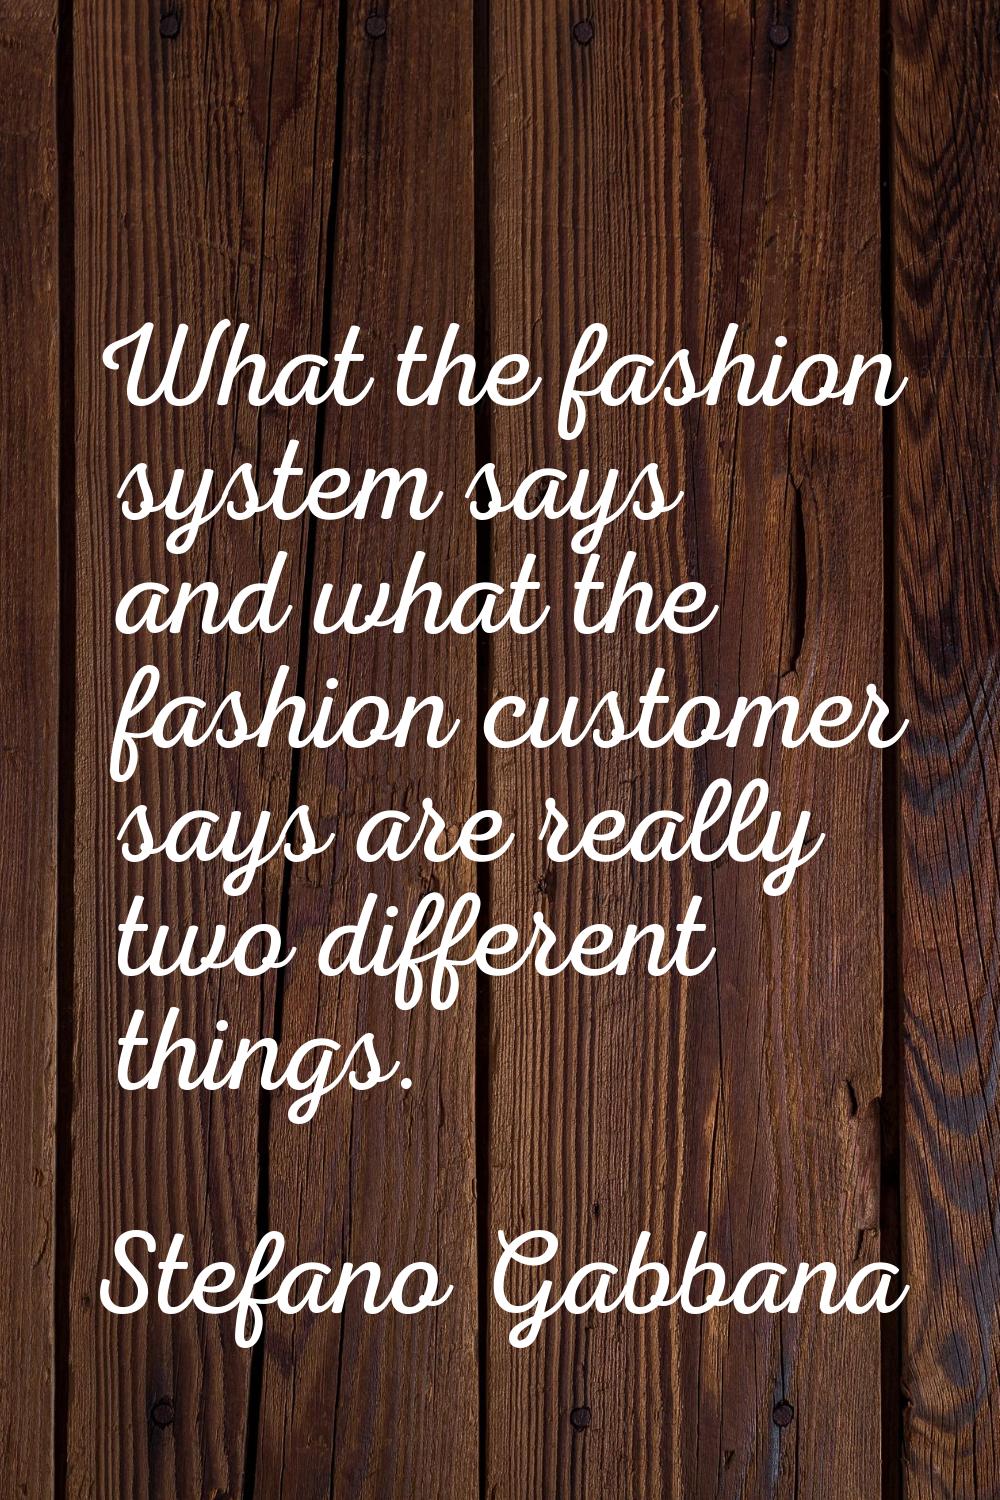 What the fashion system says and what the fashion customer says are really two different things.